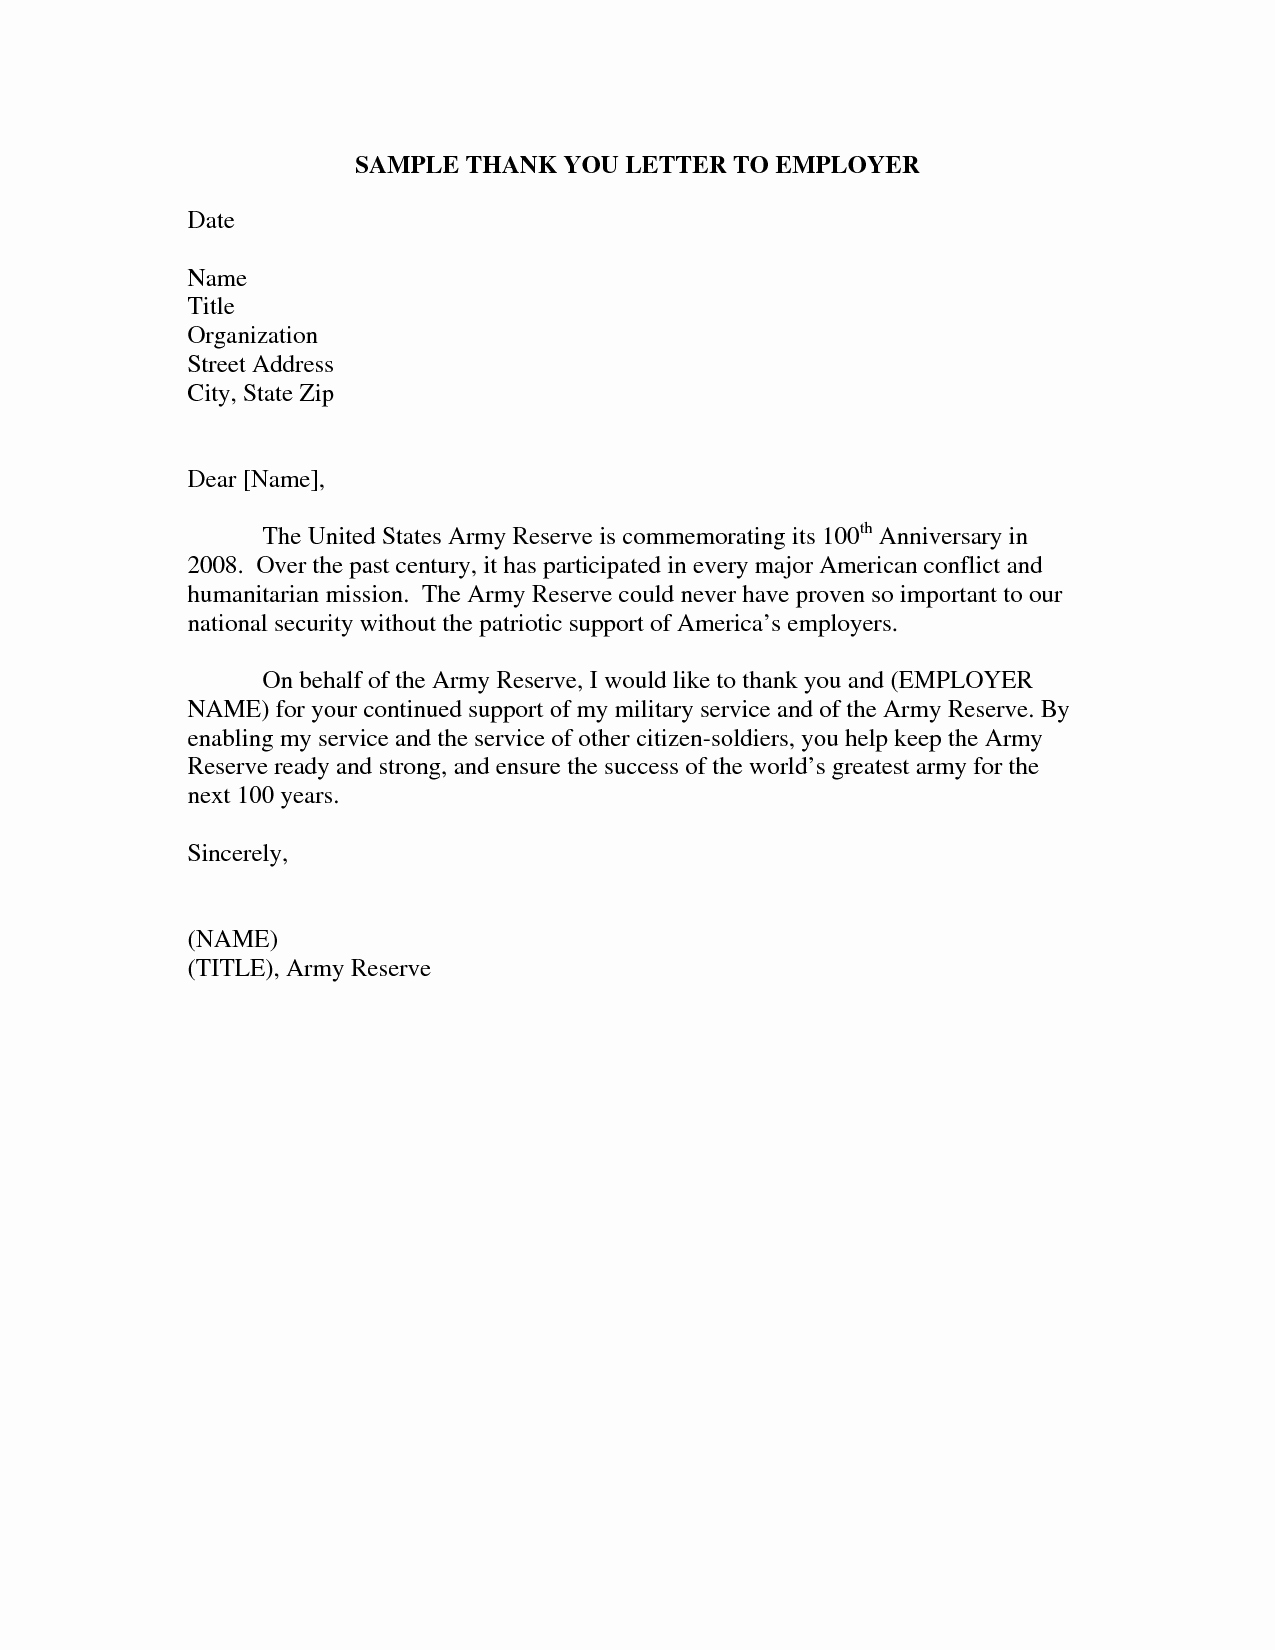 Thank You Letter to Employer Beautiful Best S Of Employee Thank You Letter Examples Thank